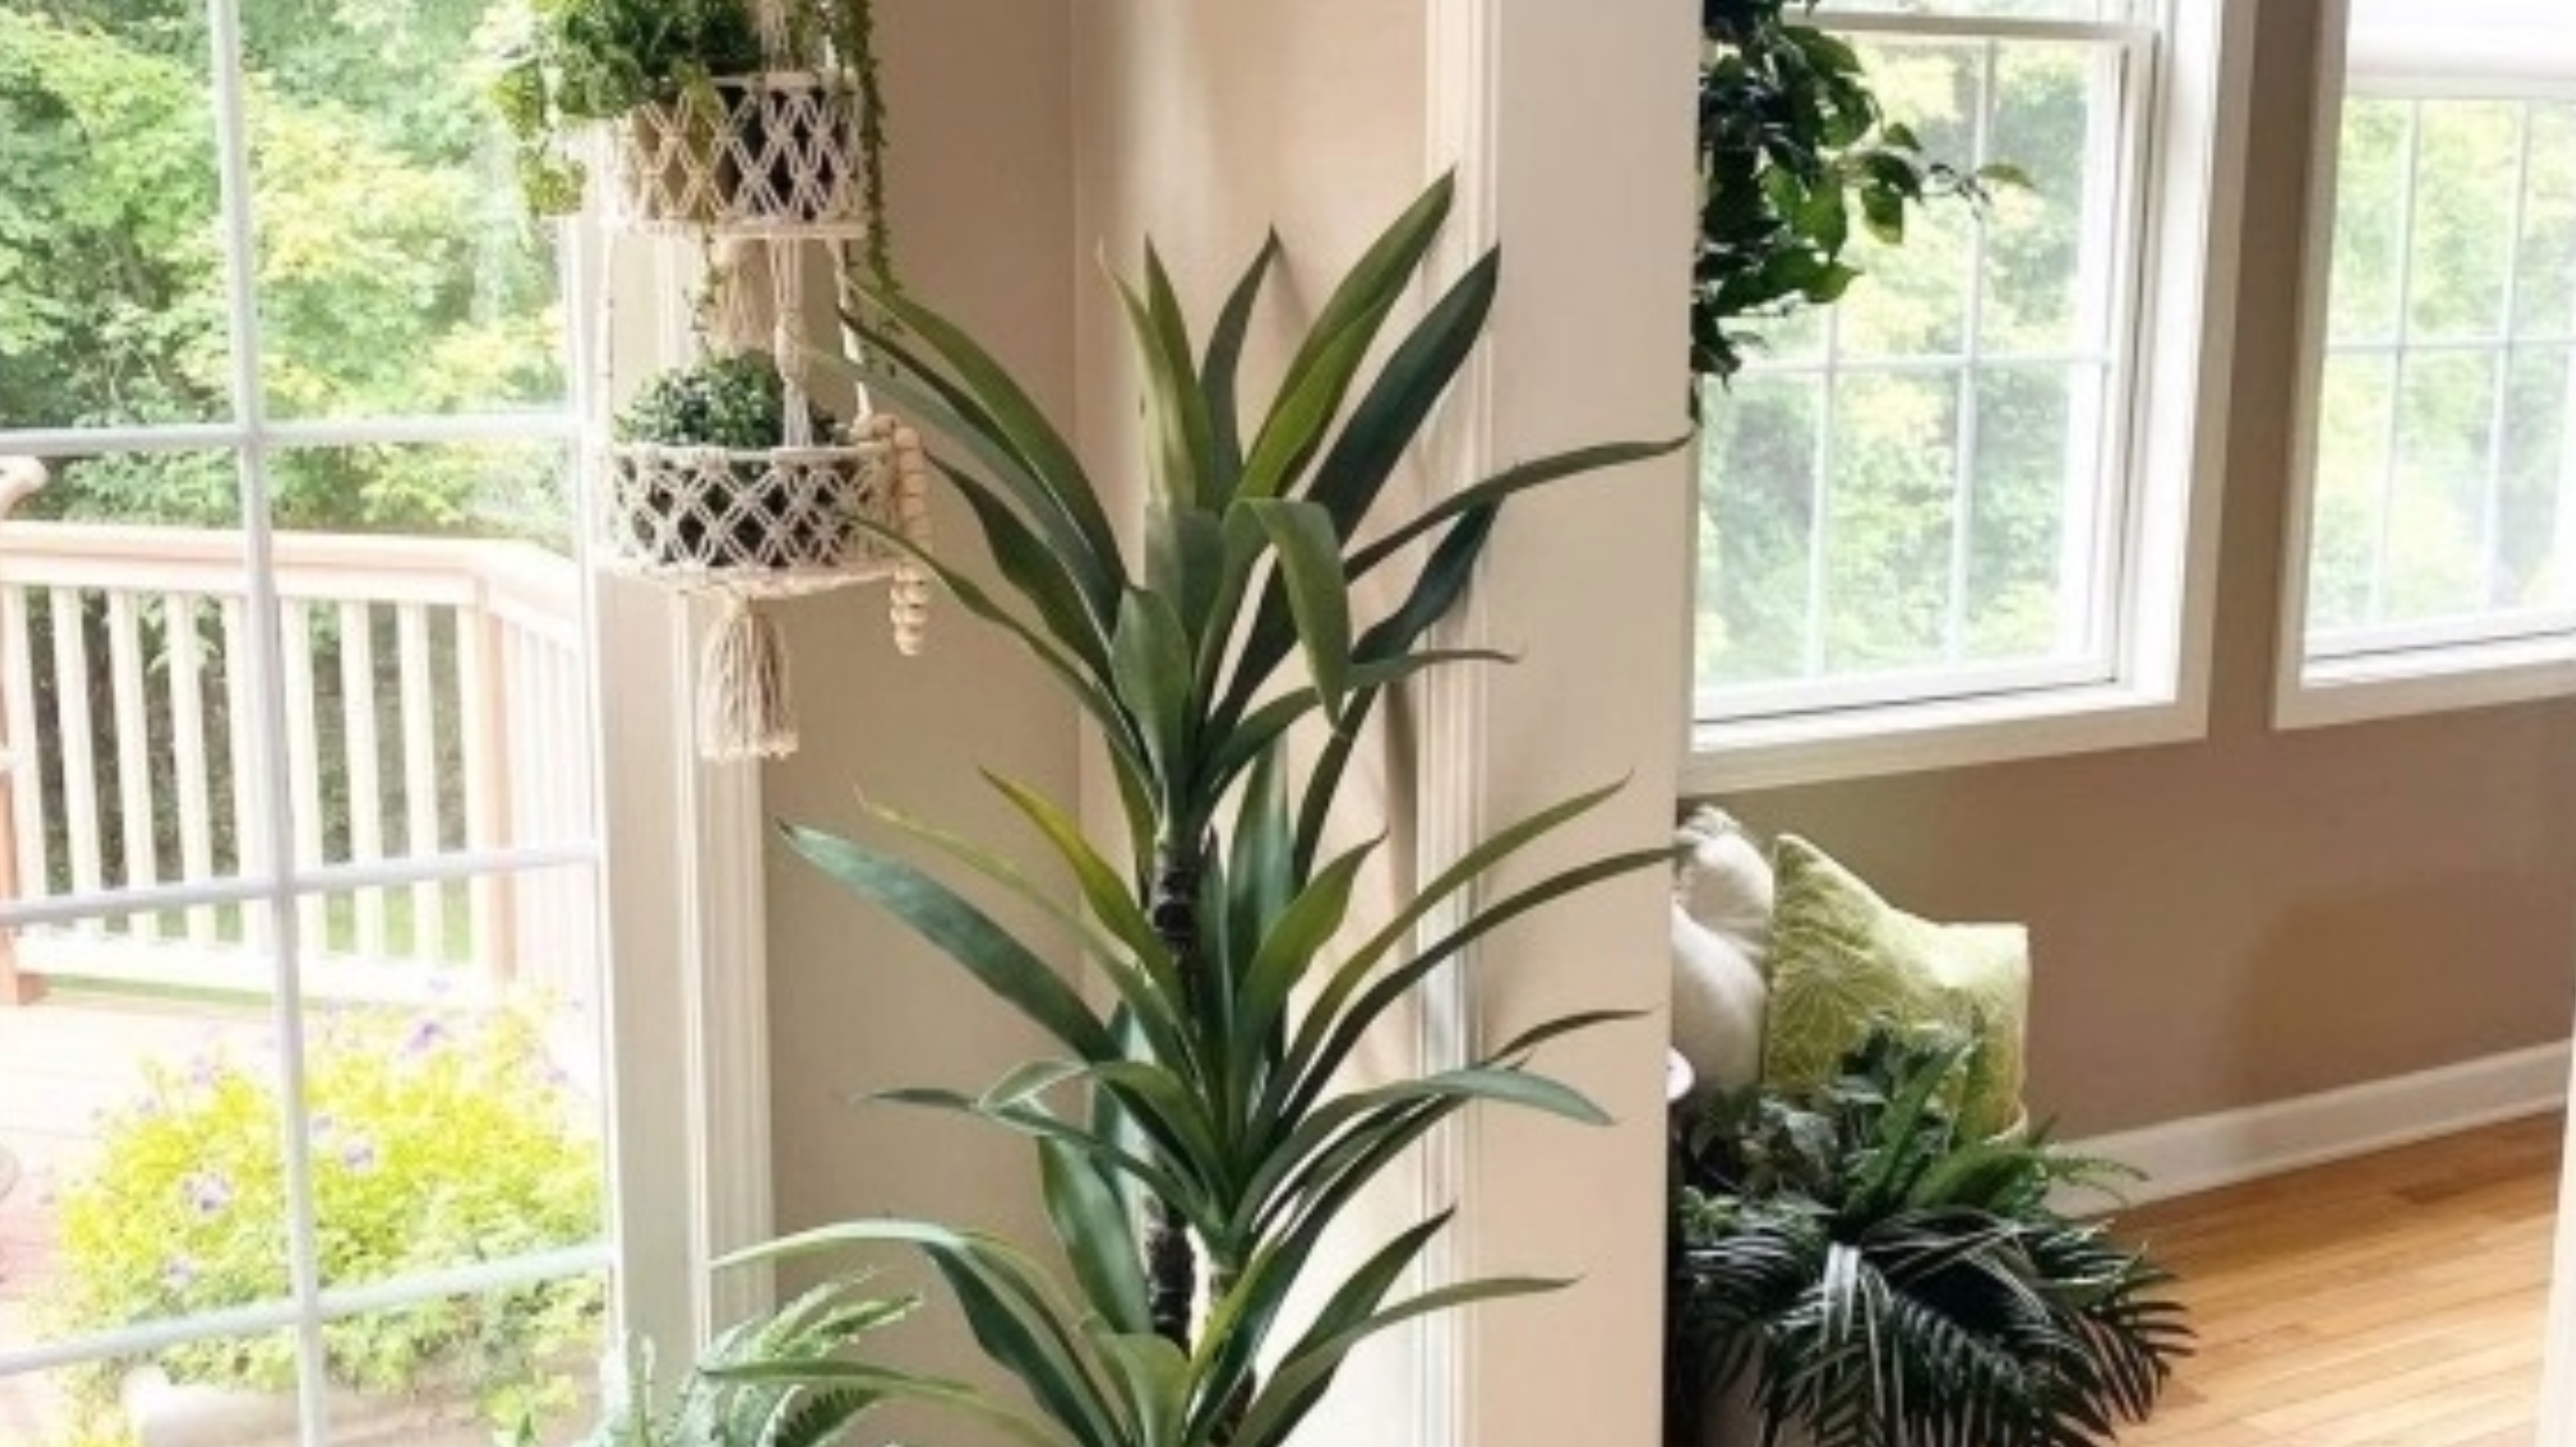 Create a Serene Summer Bedroom with Artiplanto's Faux Plants